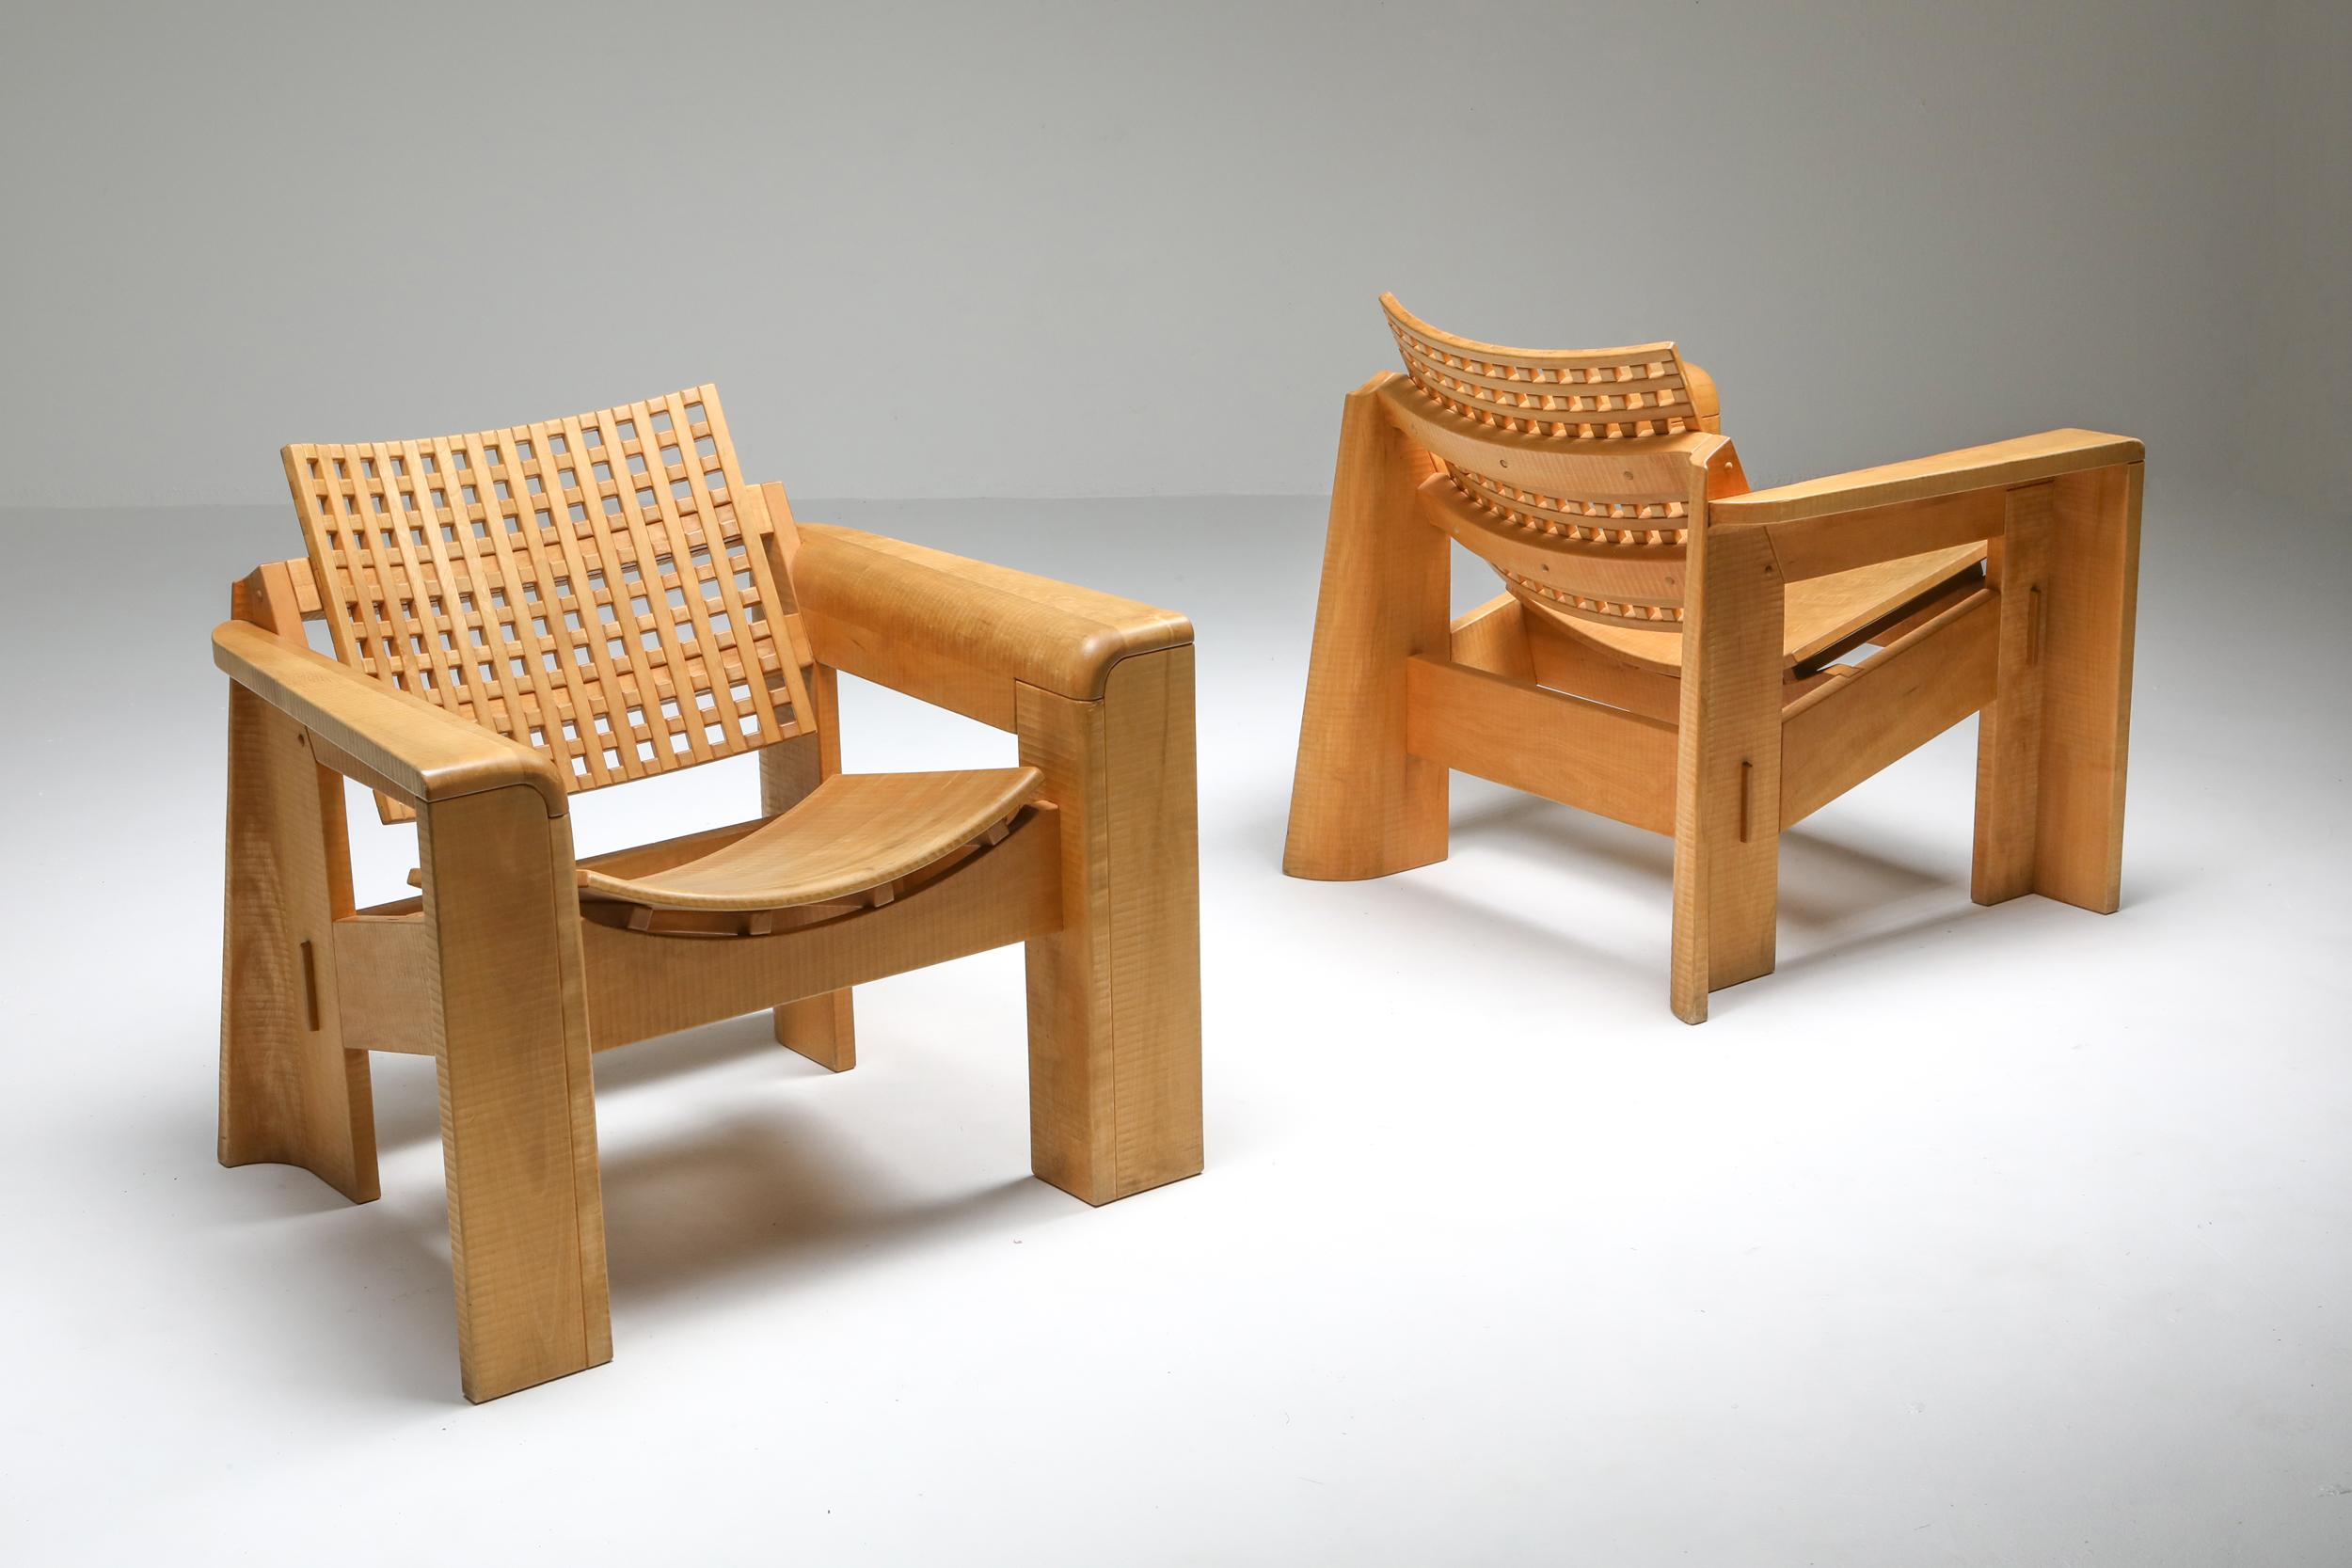 Lounge chairs in elm, Italy, 1980s, Giuseppe Rivadossi

Great pieces handmade by Italian craftsmen, arguably the best in the world.
These chairs combine qualities of superior architecture and design with craft and skill

The quality of the work